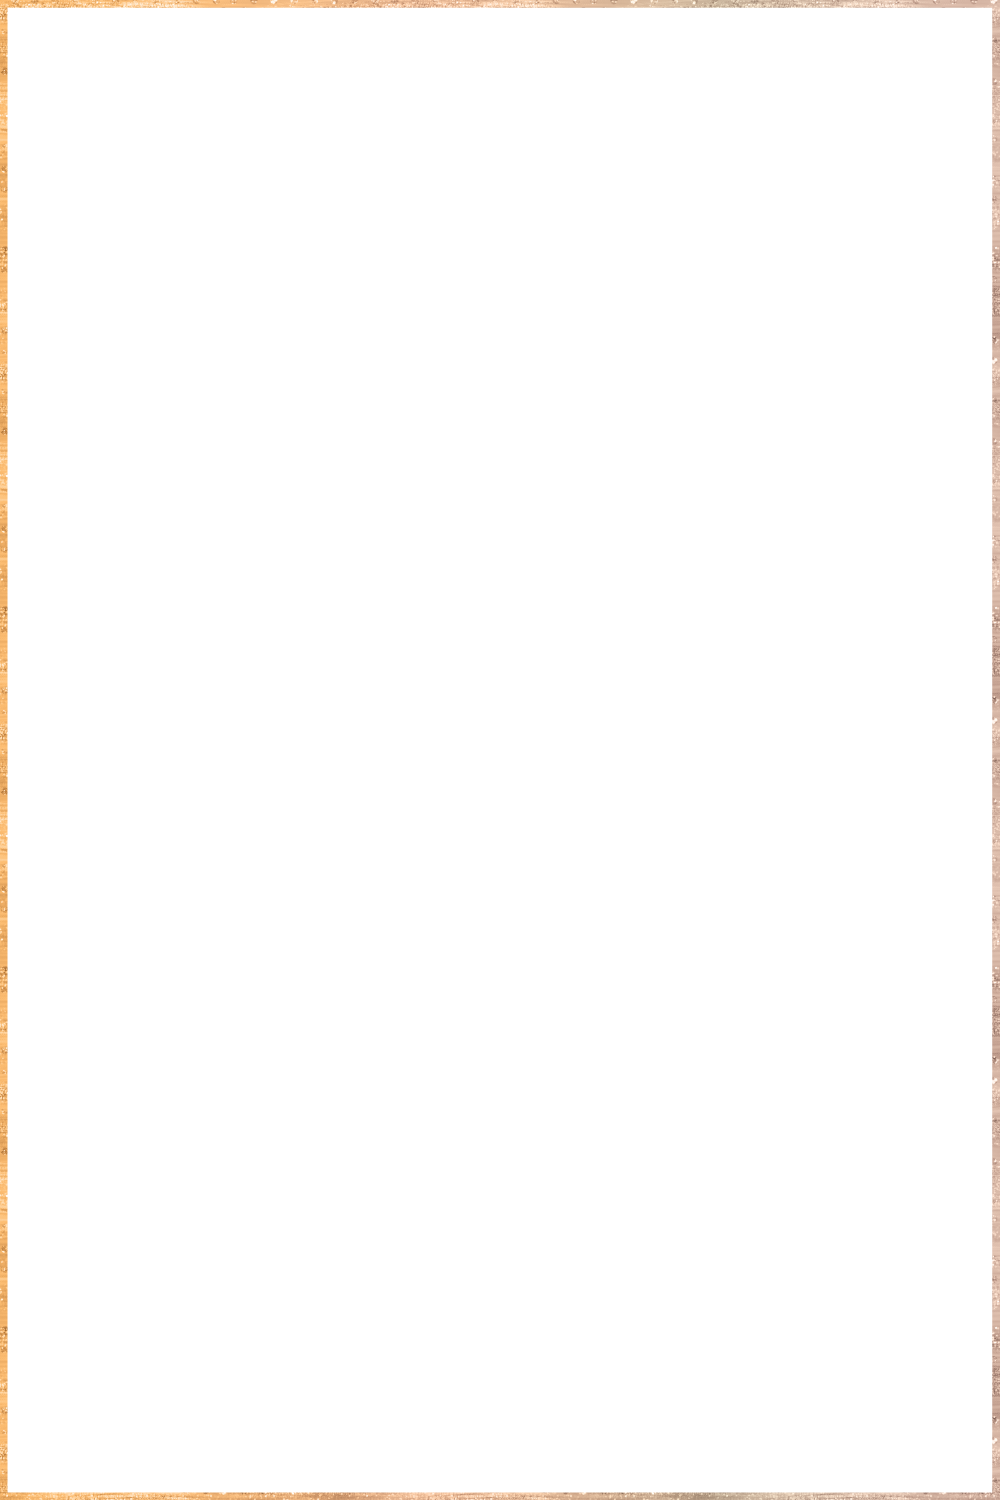 Download Frames Rectangle 72 Dpi - Thin Gold Frame Png PNG Image with